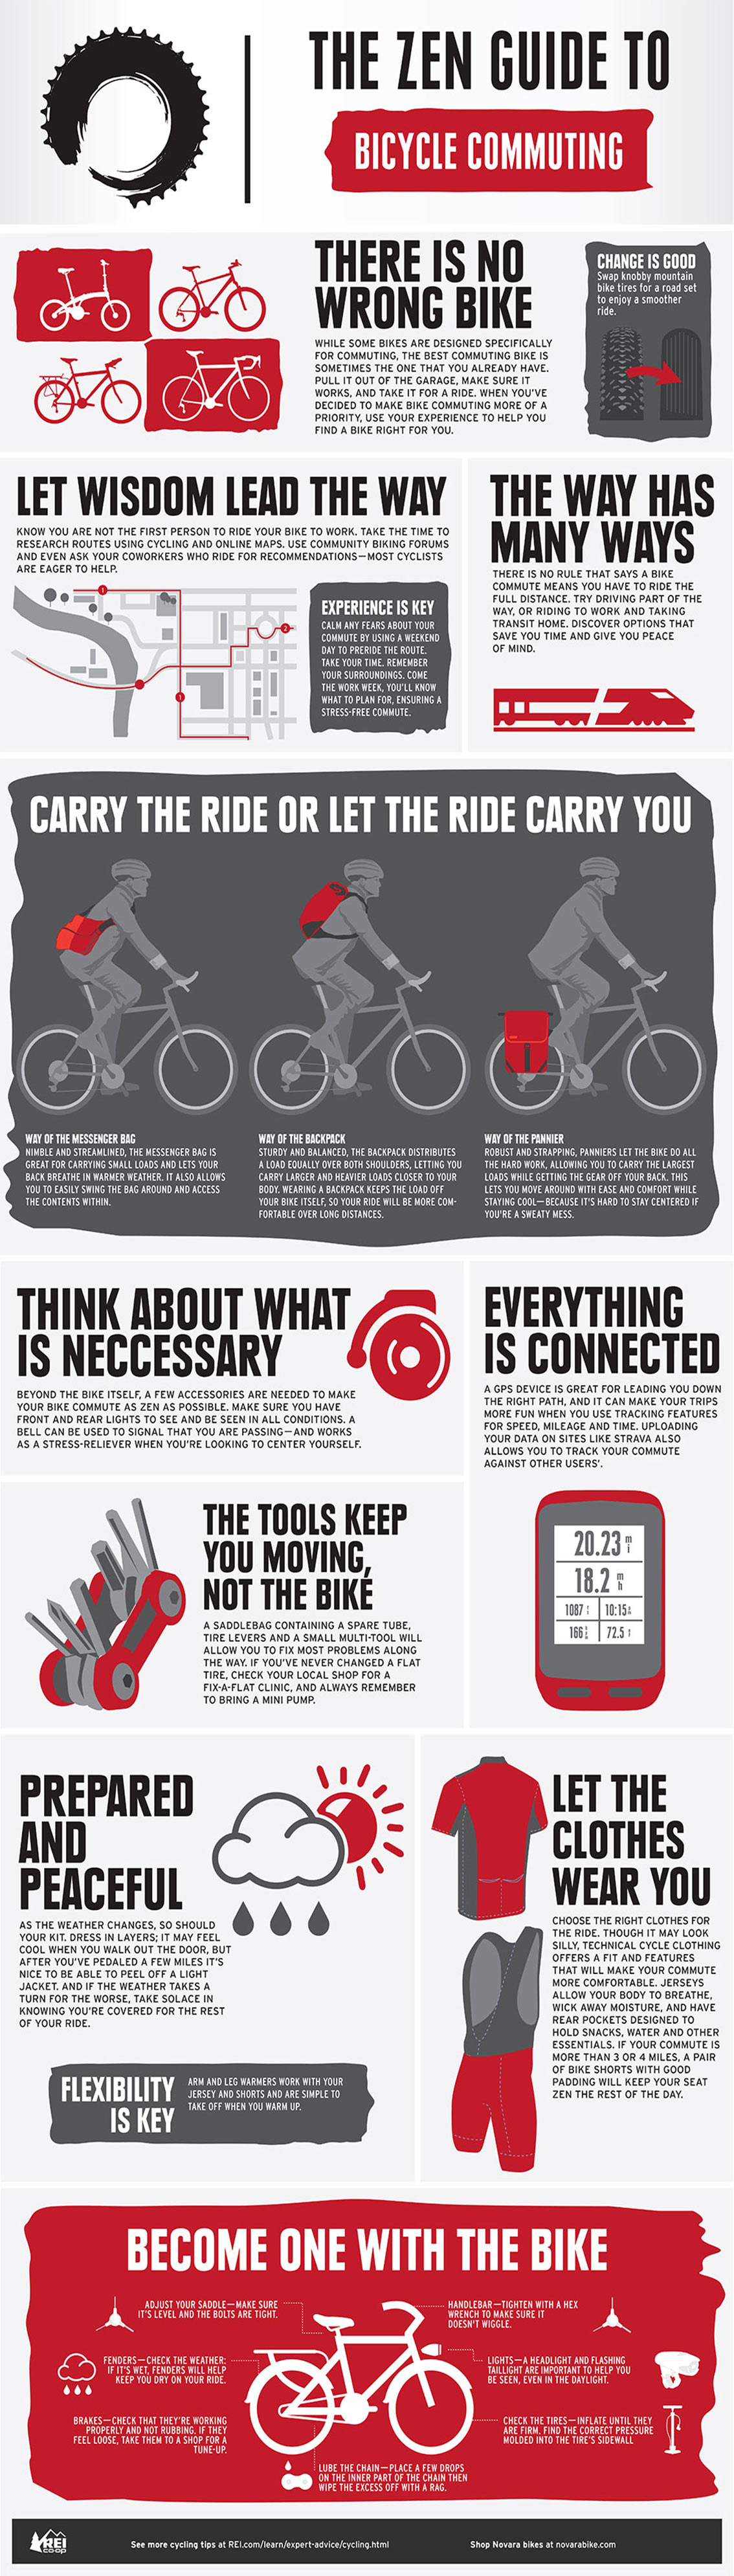 Zen Guide to Commuting to Work by Bike Infographic